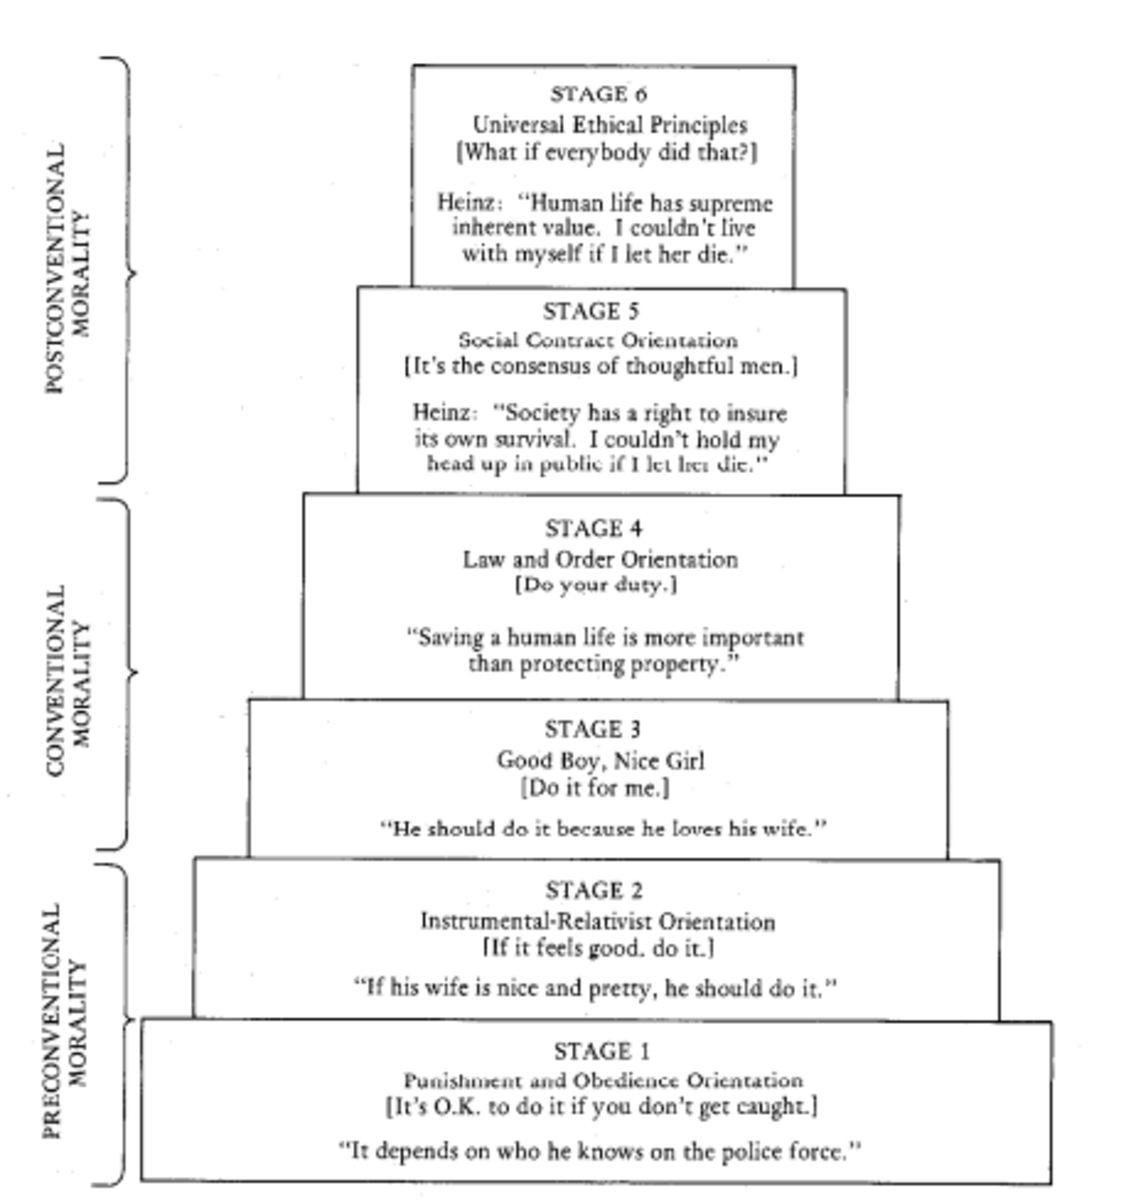 Lawrence Kohlberg's six stages of moral development